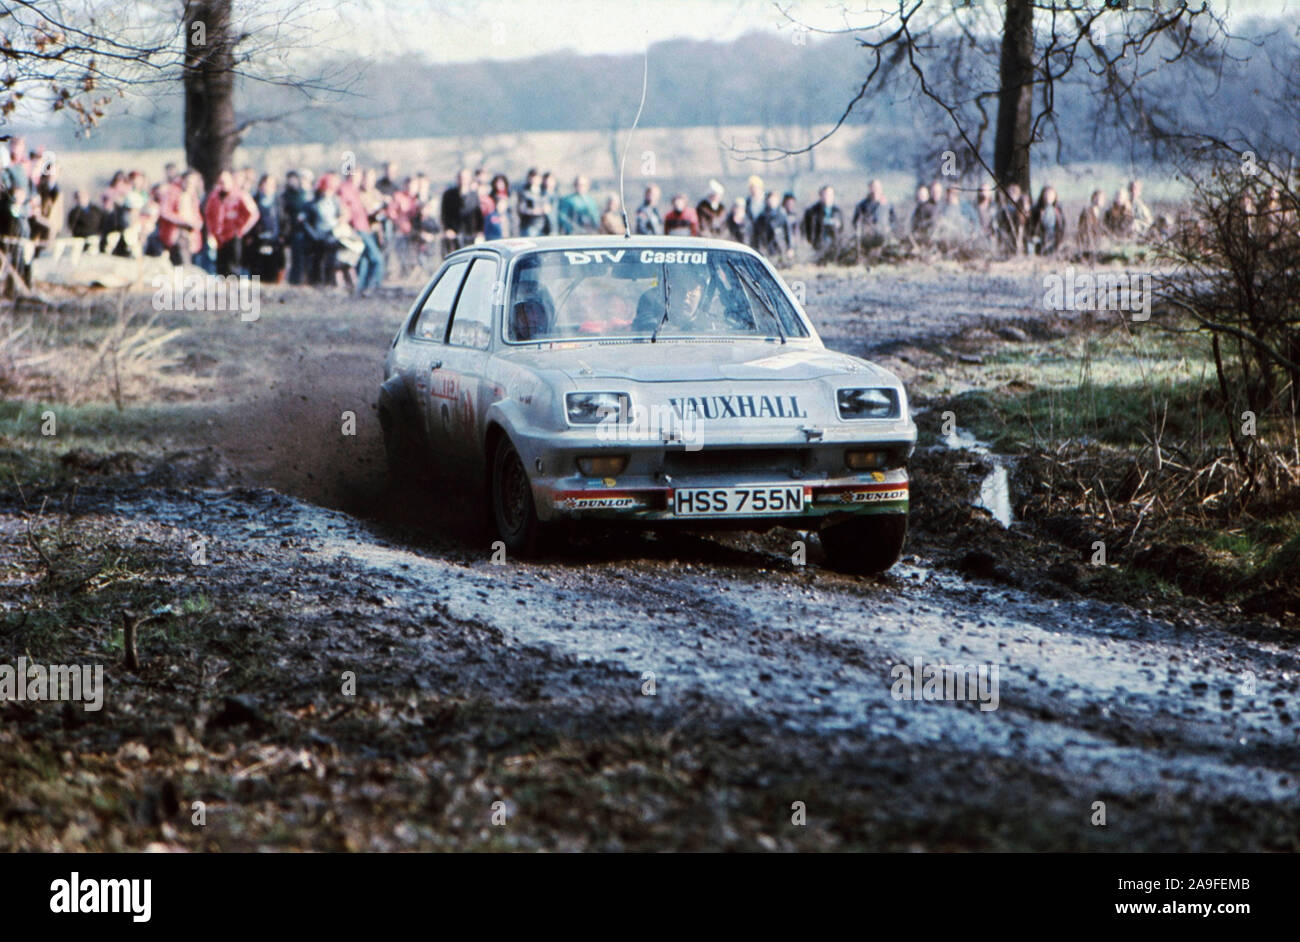 1975 vauxhall car rallying, Angleterre du Nord, Royaume-Uni Banque D'Images